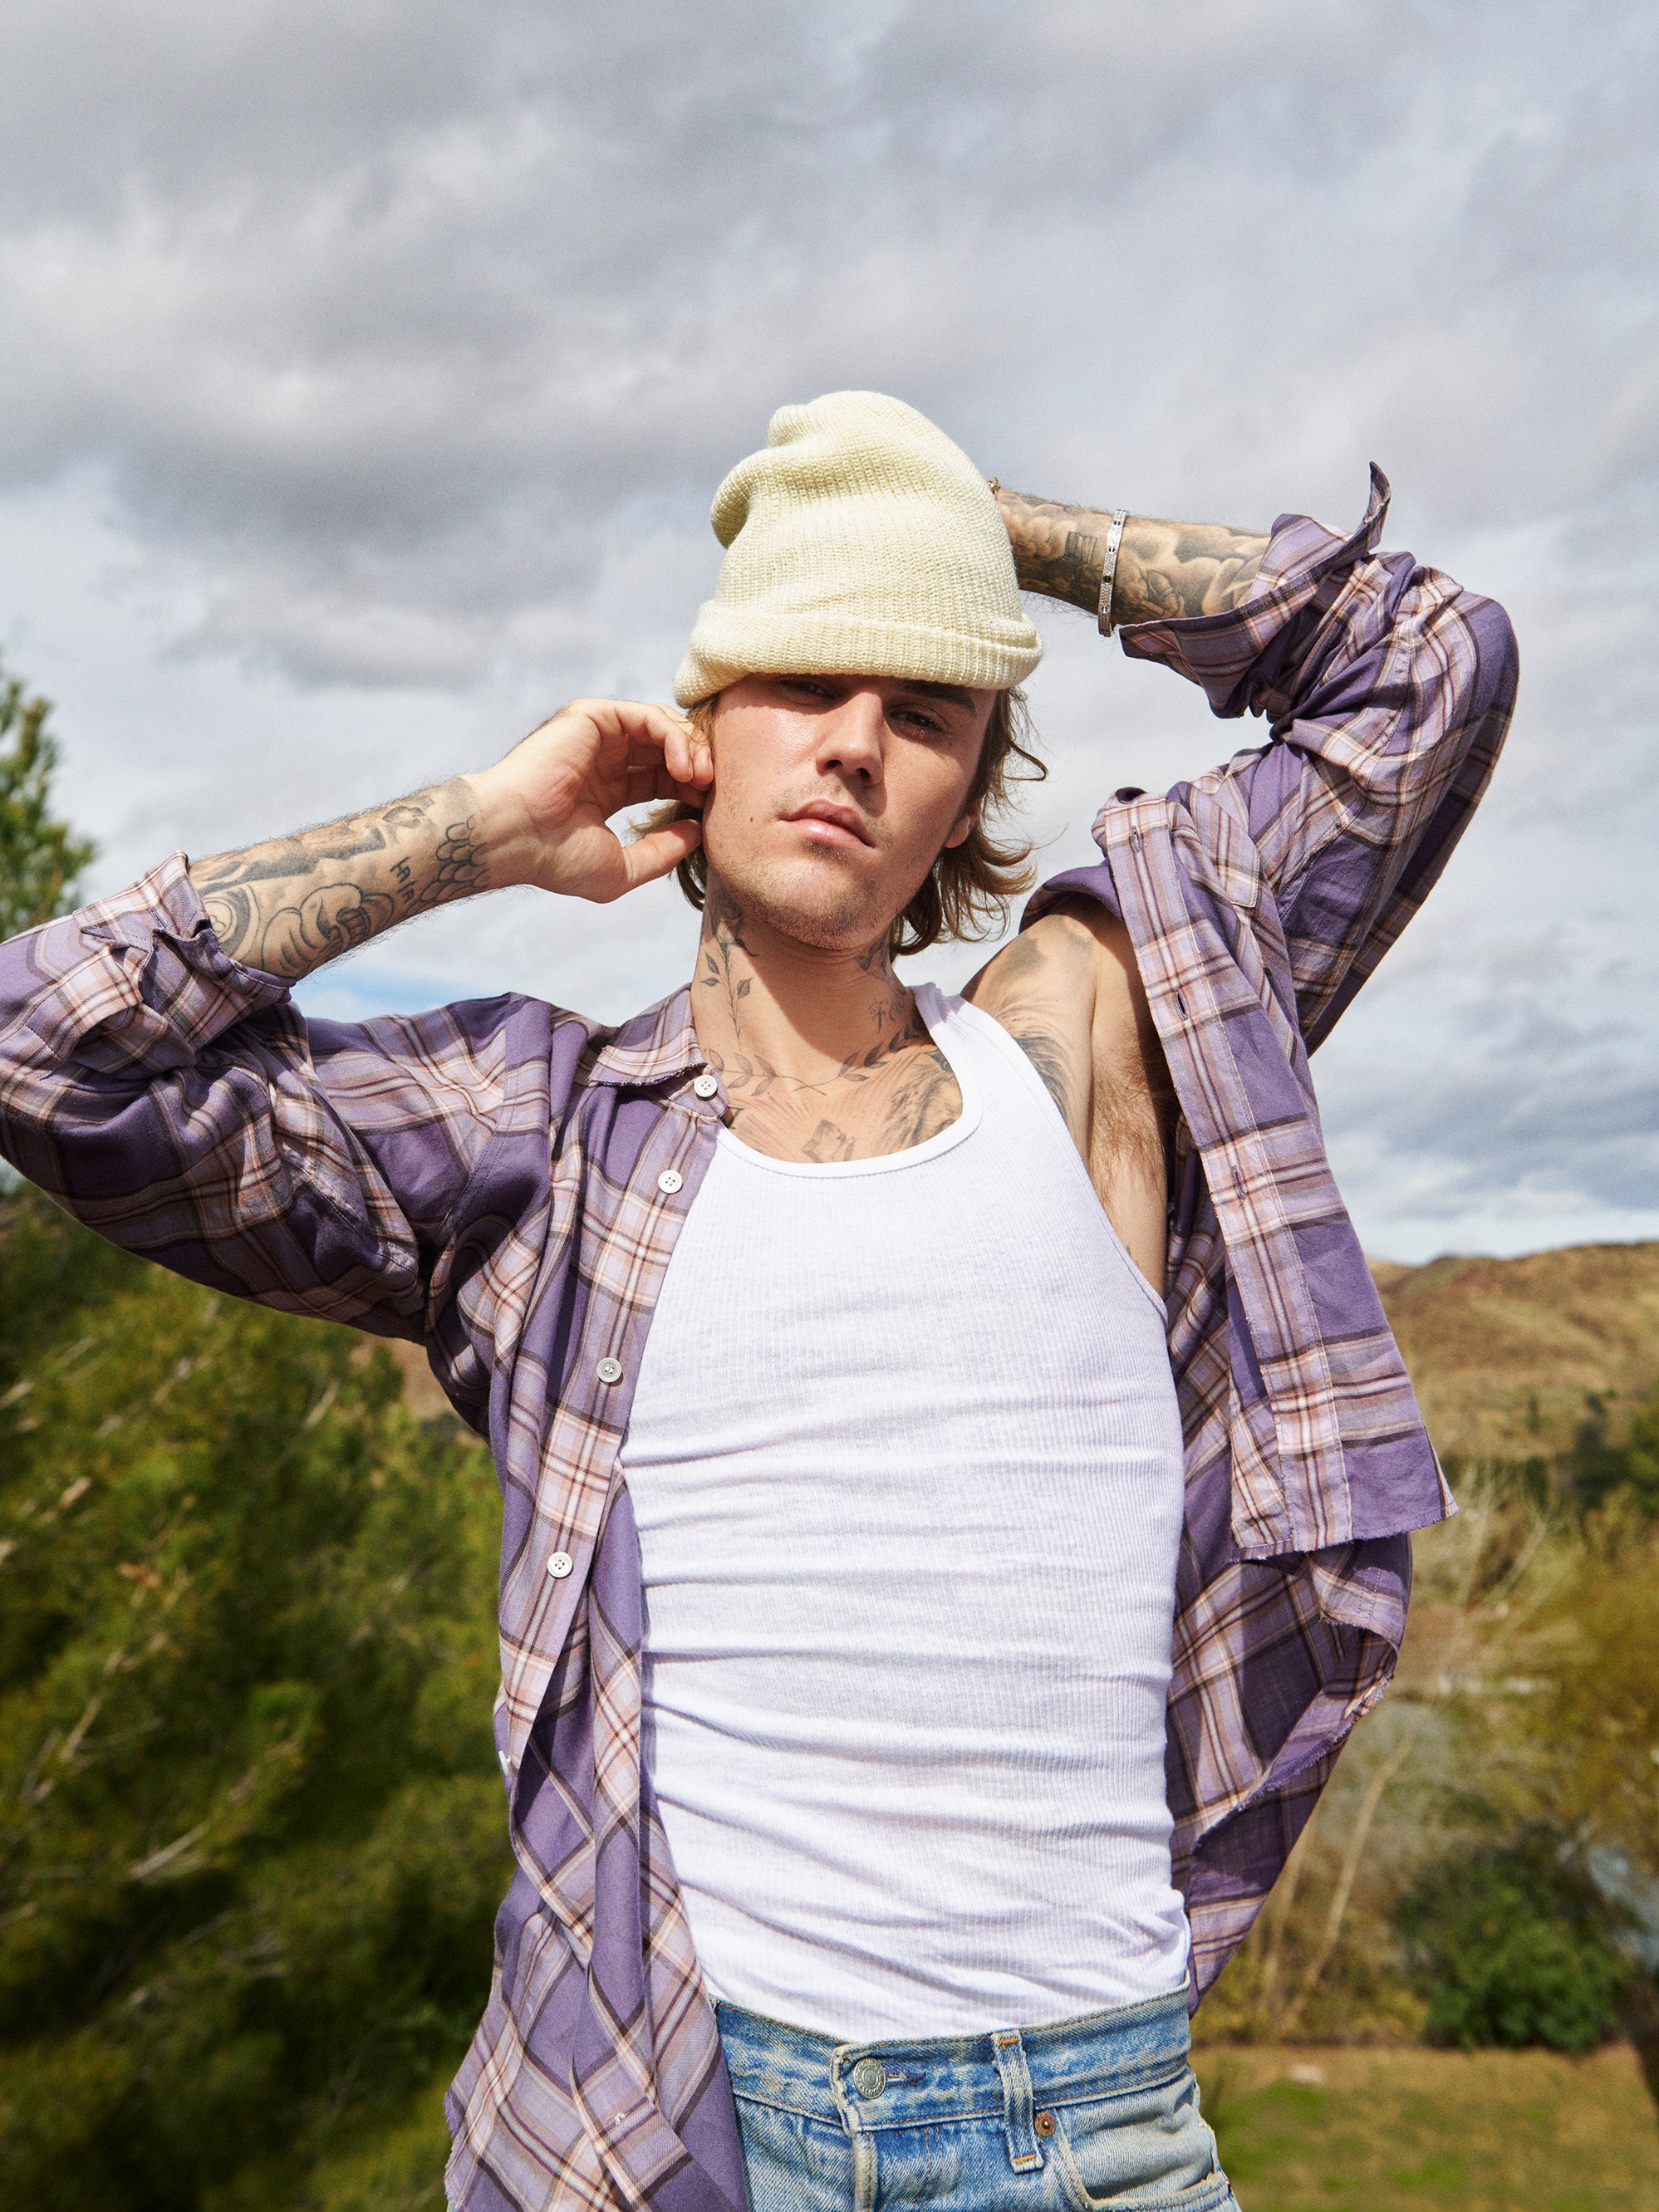 5 Famous Justin Bieber Quotes